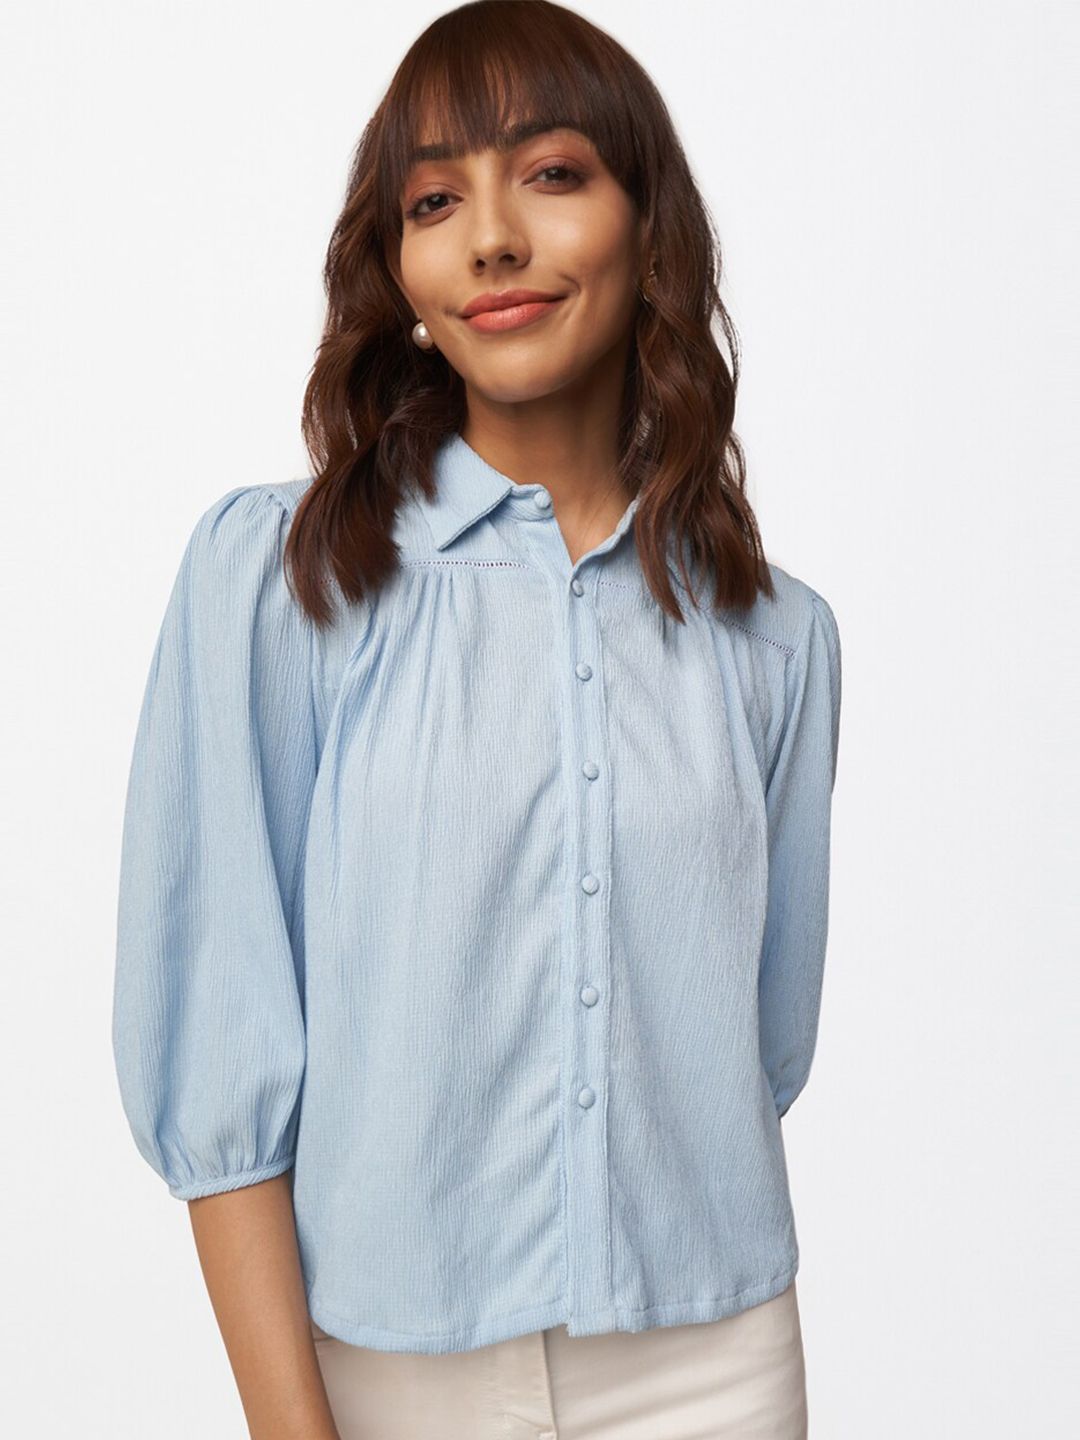 AND Blue Solid Shirt Style Top Price in India